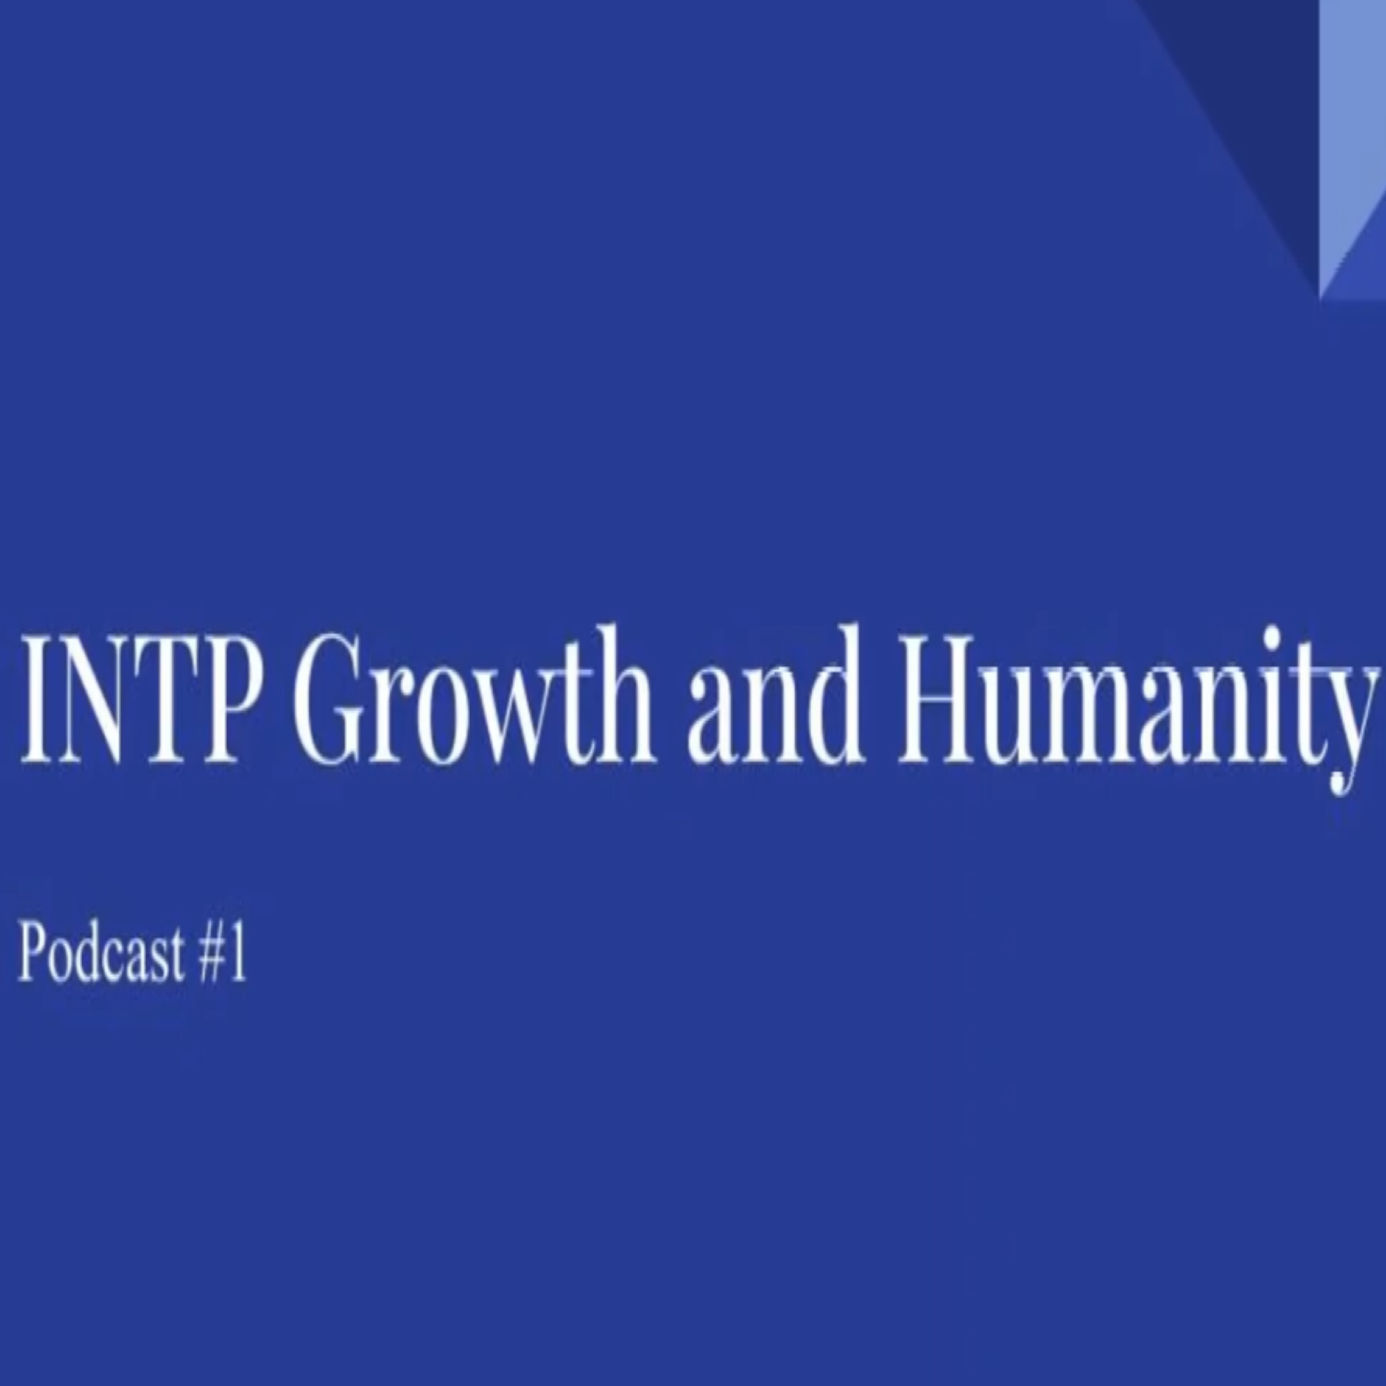 INTP Growth and Humanity